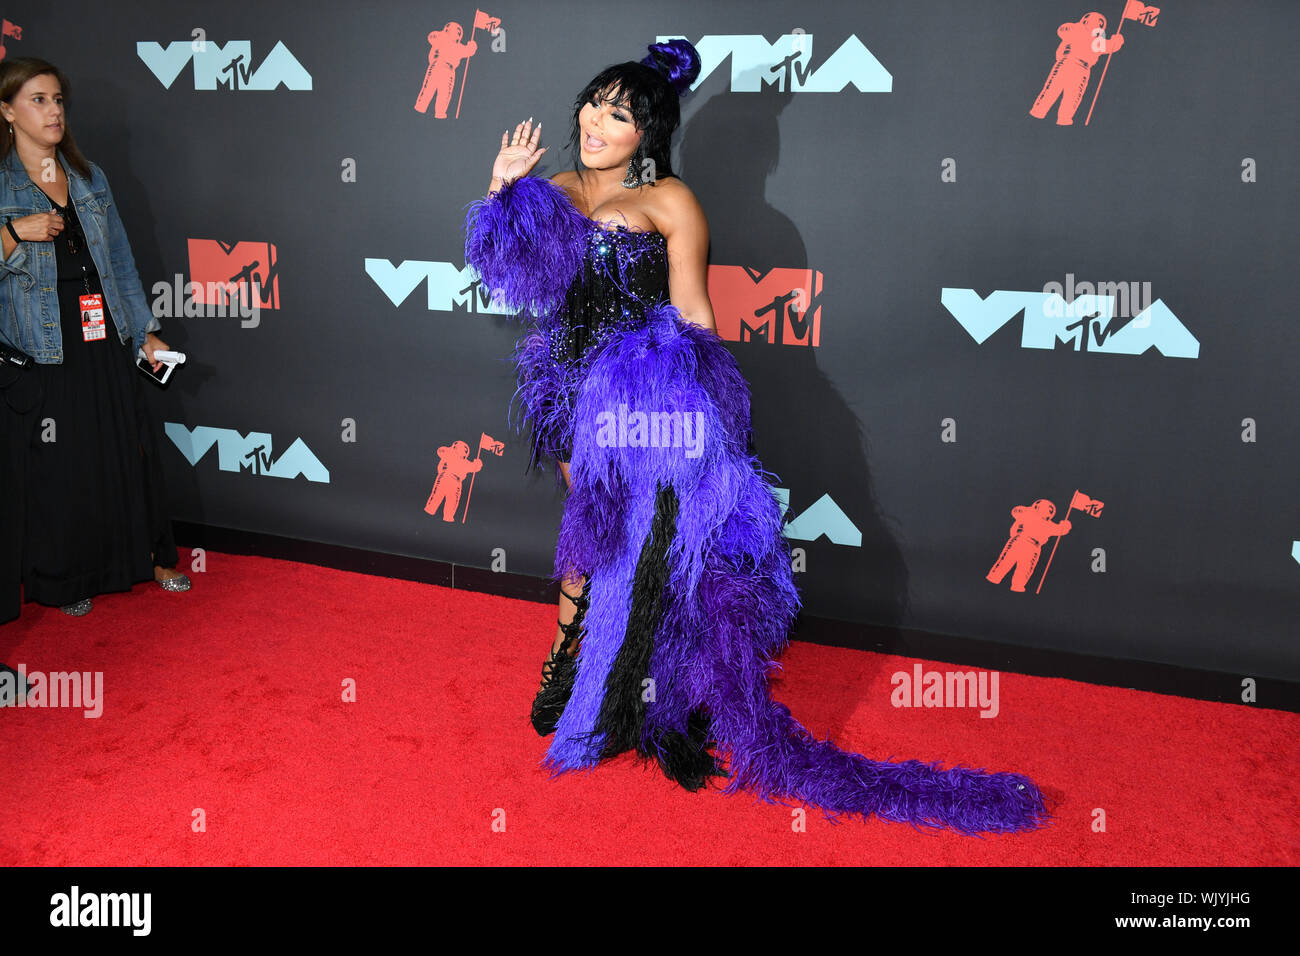 Lil Kim attends the 2019 MTV Video Music Awards at Prudential Center on August 26, 2019 in Newark, New Jersey. Stock Photo